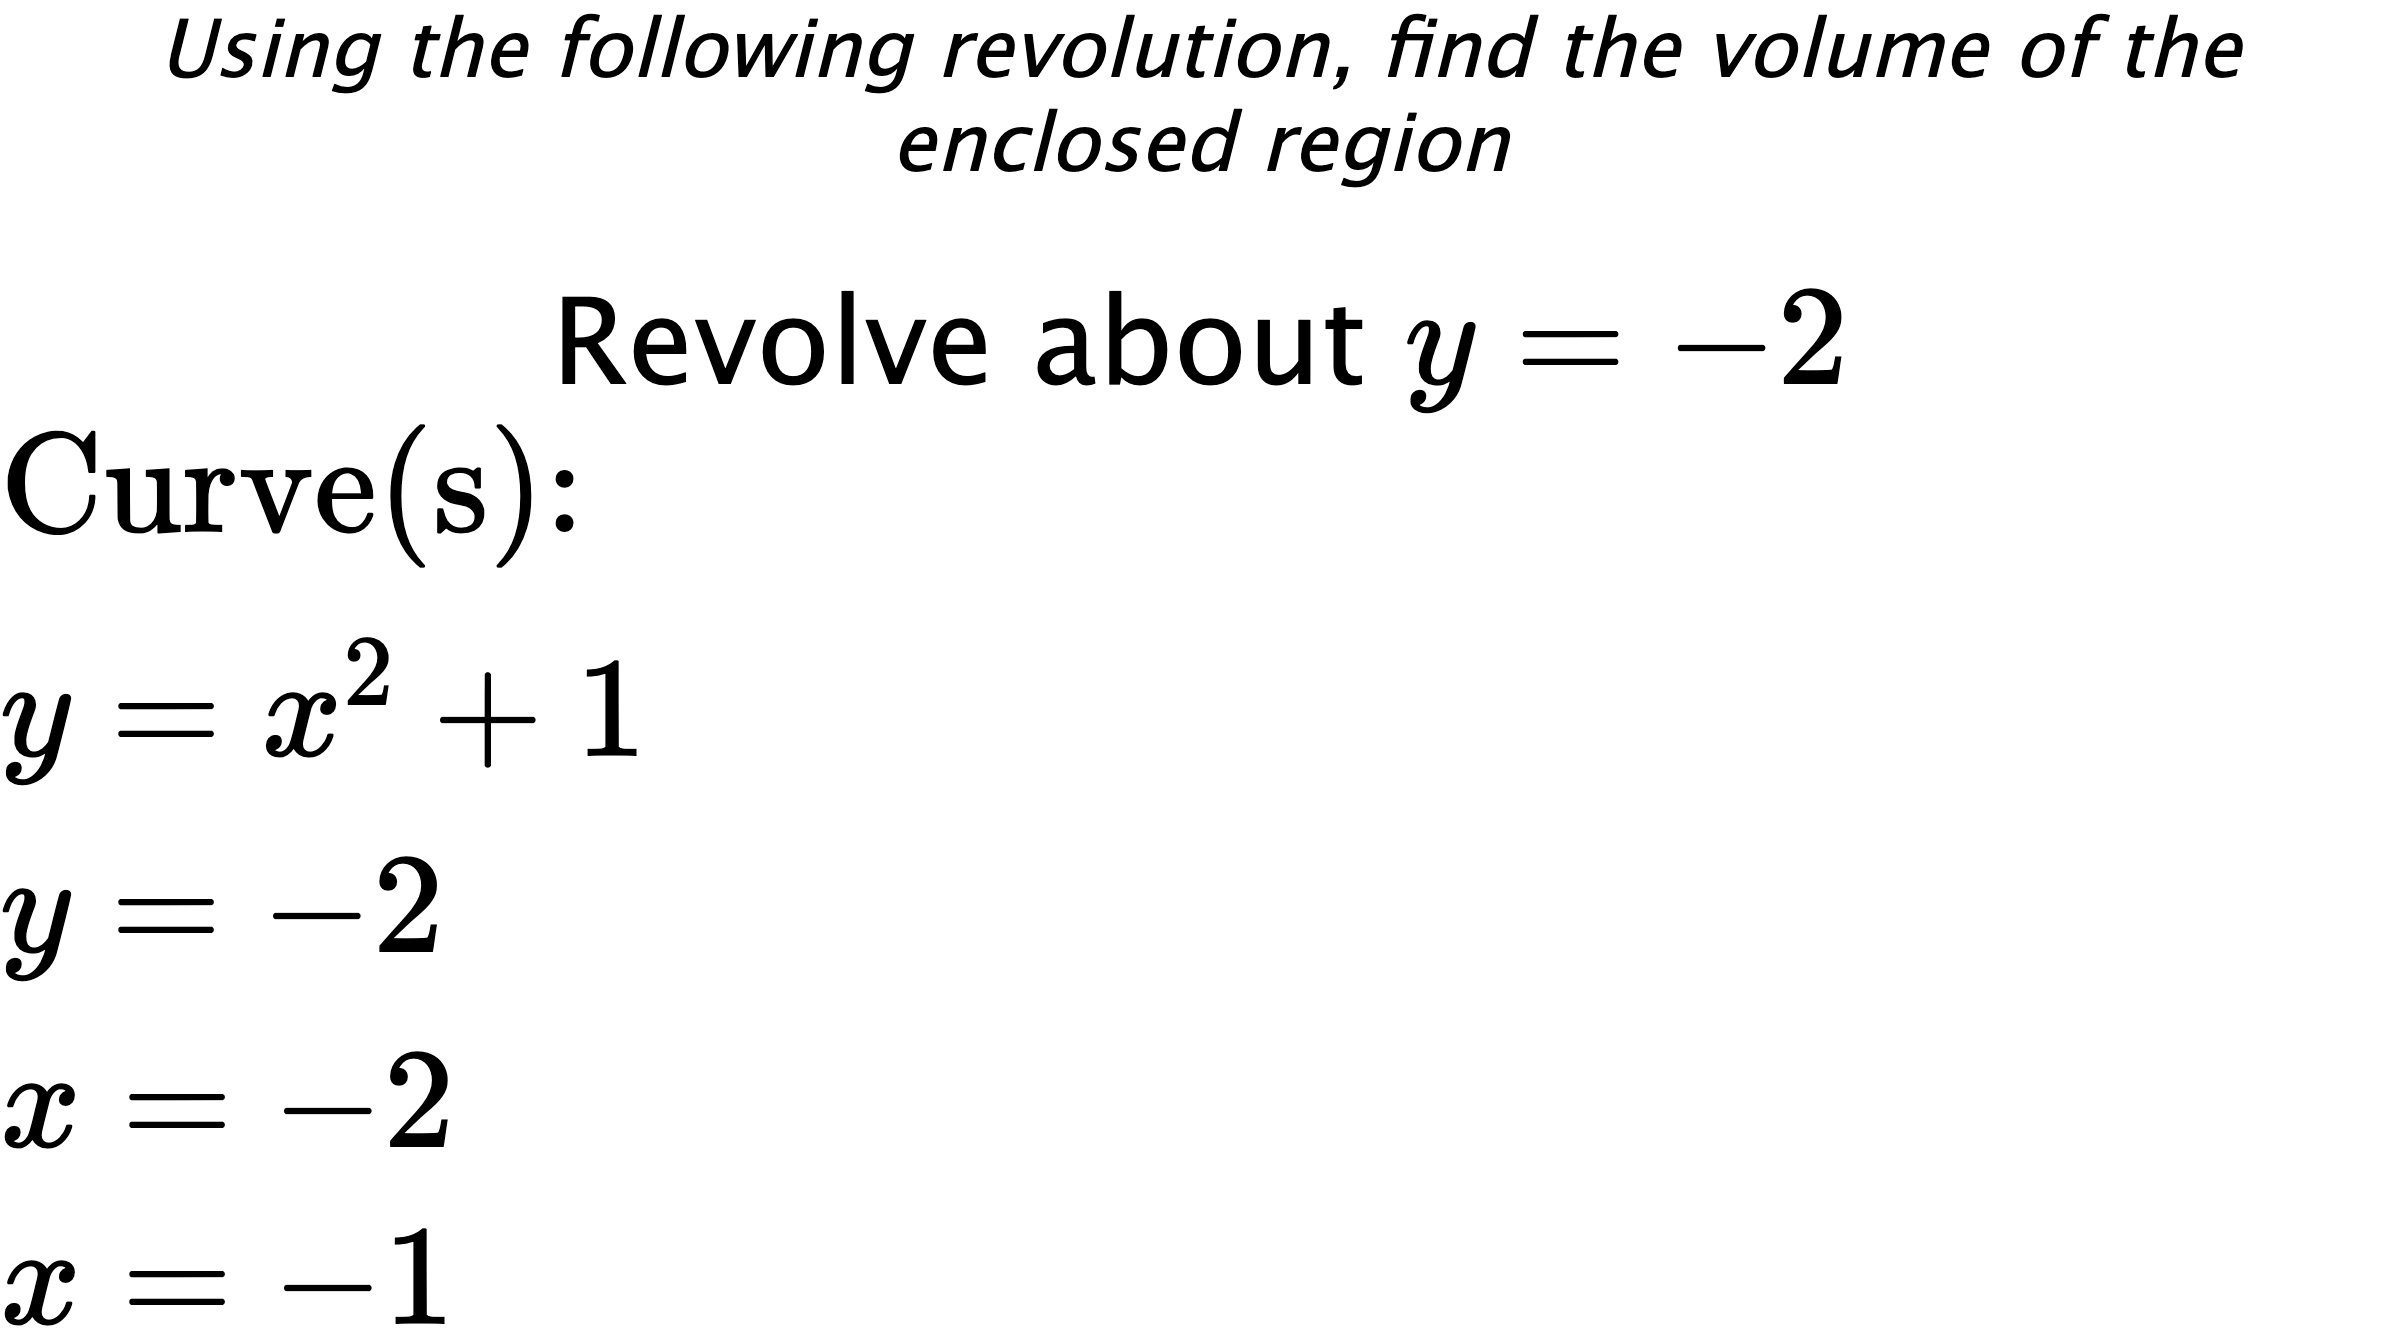 Using the following revolution, find the volume of the enclosed region Revolve about $ y=-2 $ $ \\ \text{Curve(s):} \\ { y=x^2+1 } \\ { y=-2 } \\ { x=-2 } \\ { x=-1 } $